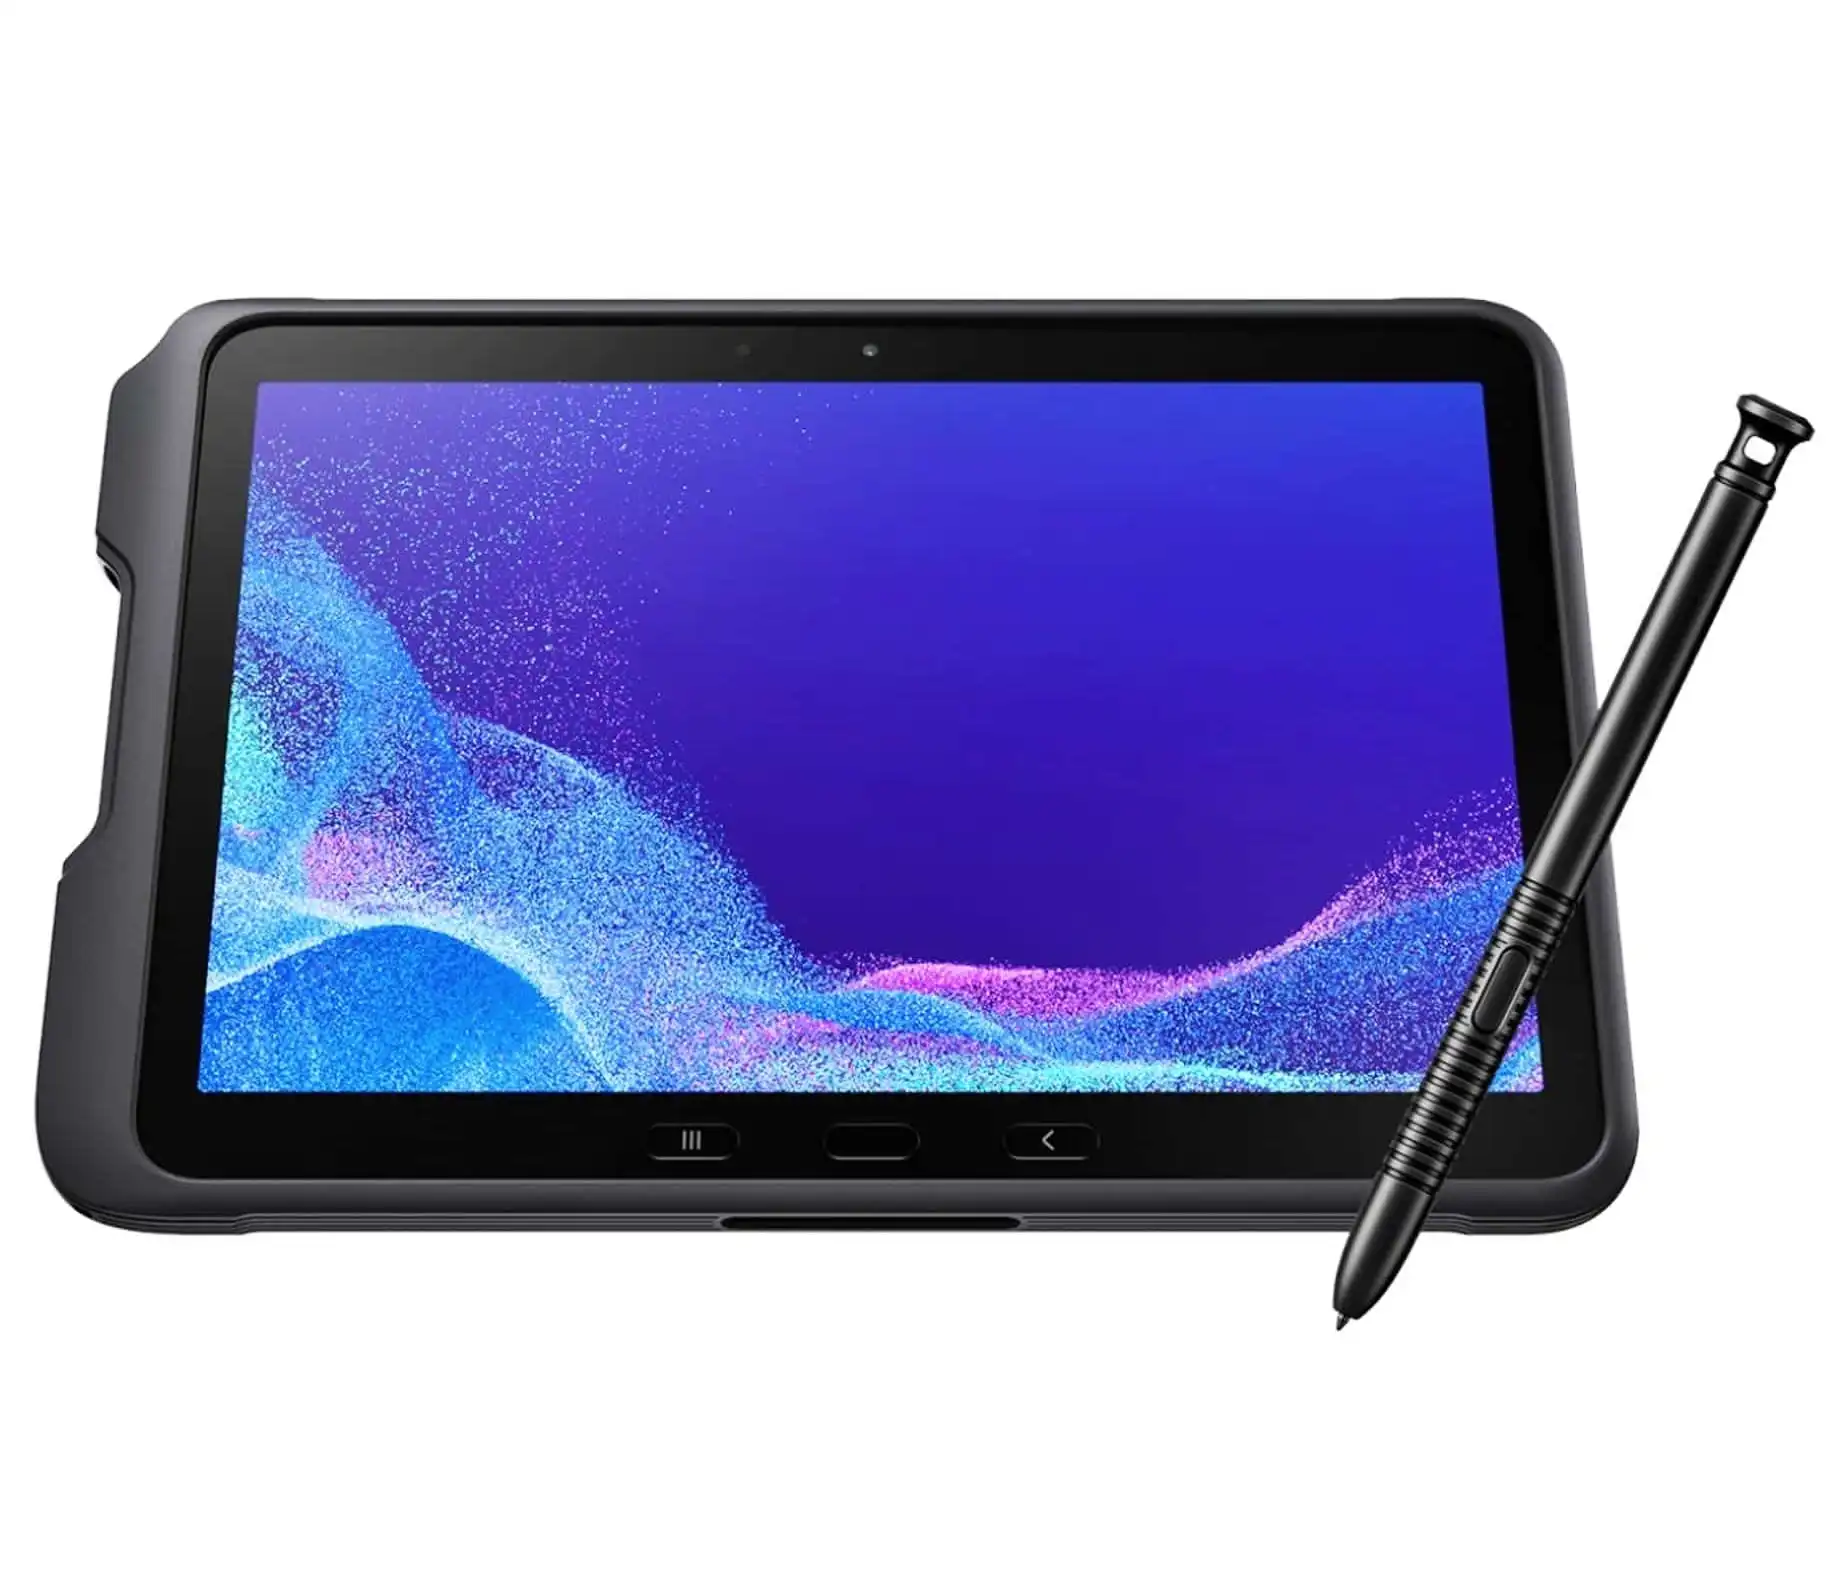  Samsung Galaxy Tab Active 4 Pro prices in Pakistan